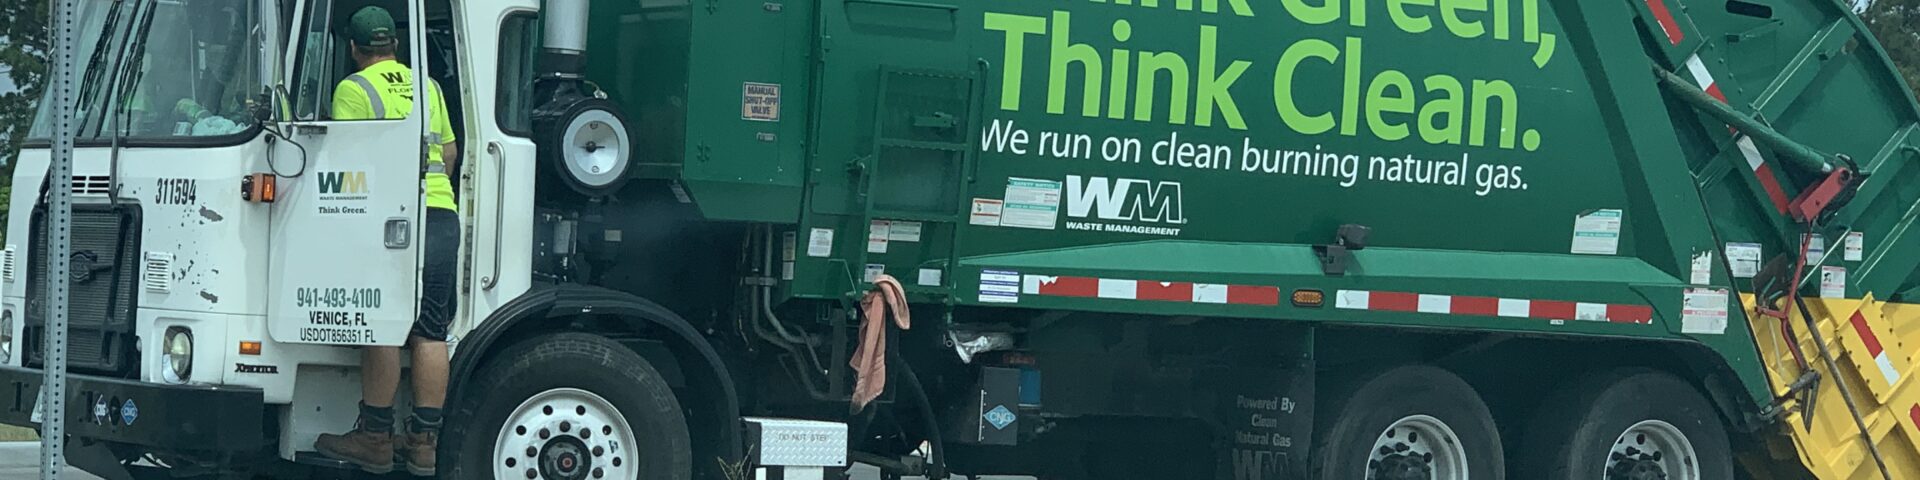 A garbage truck is parked on the side of the road.